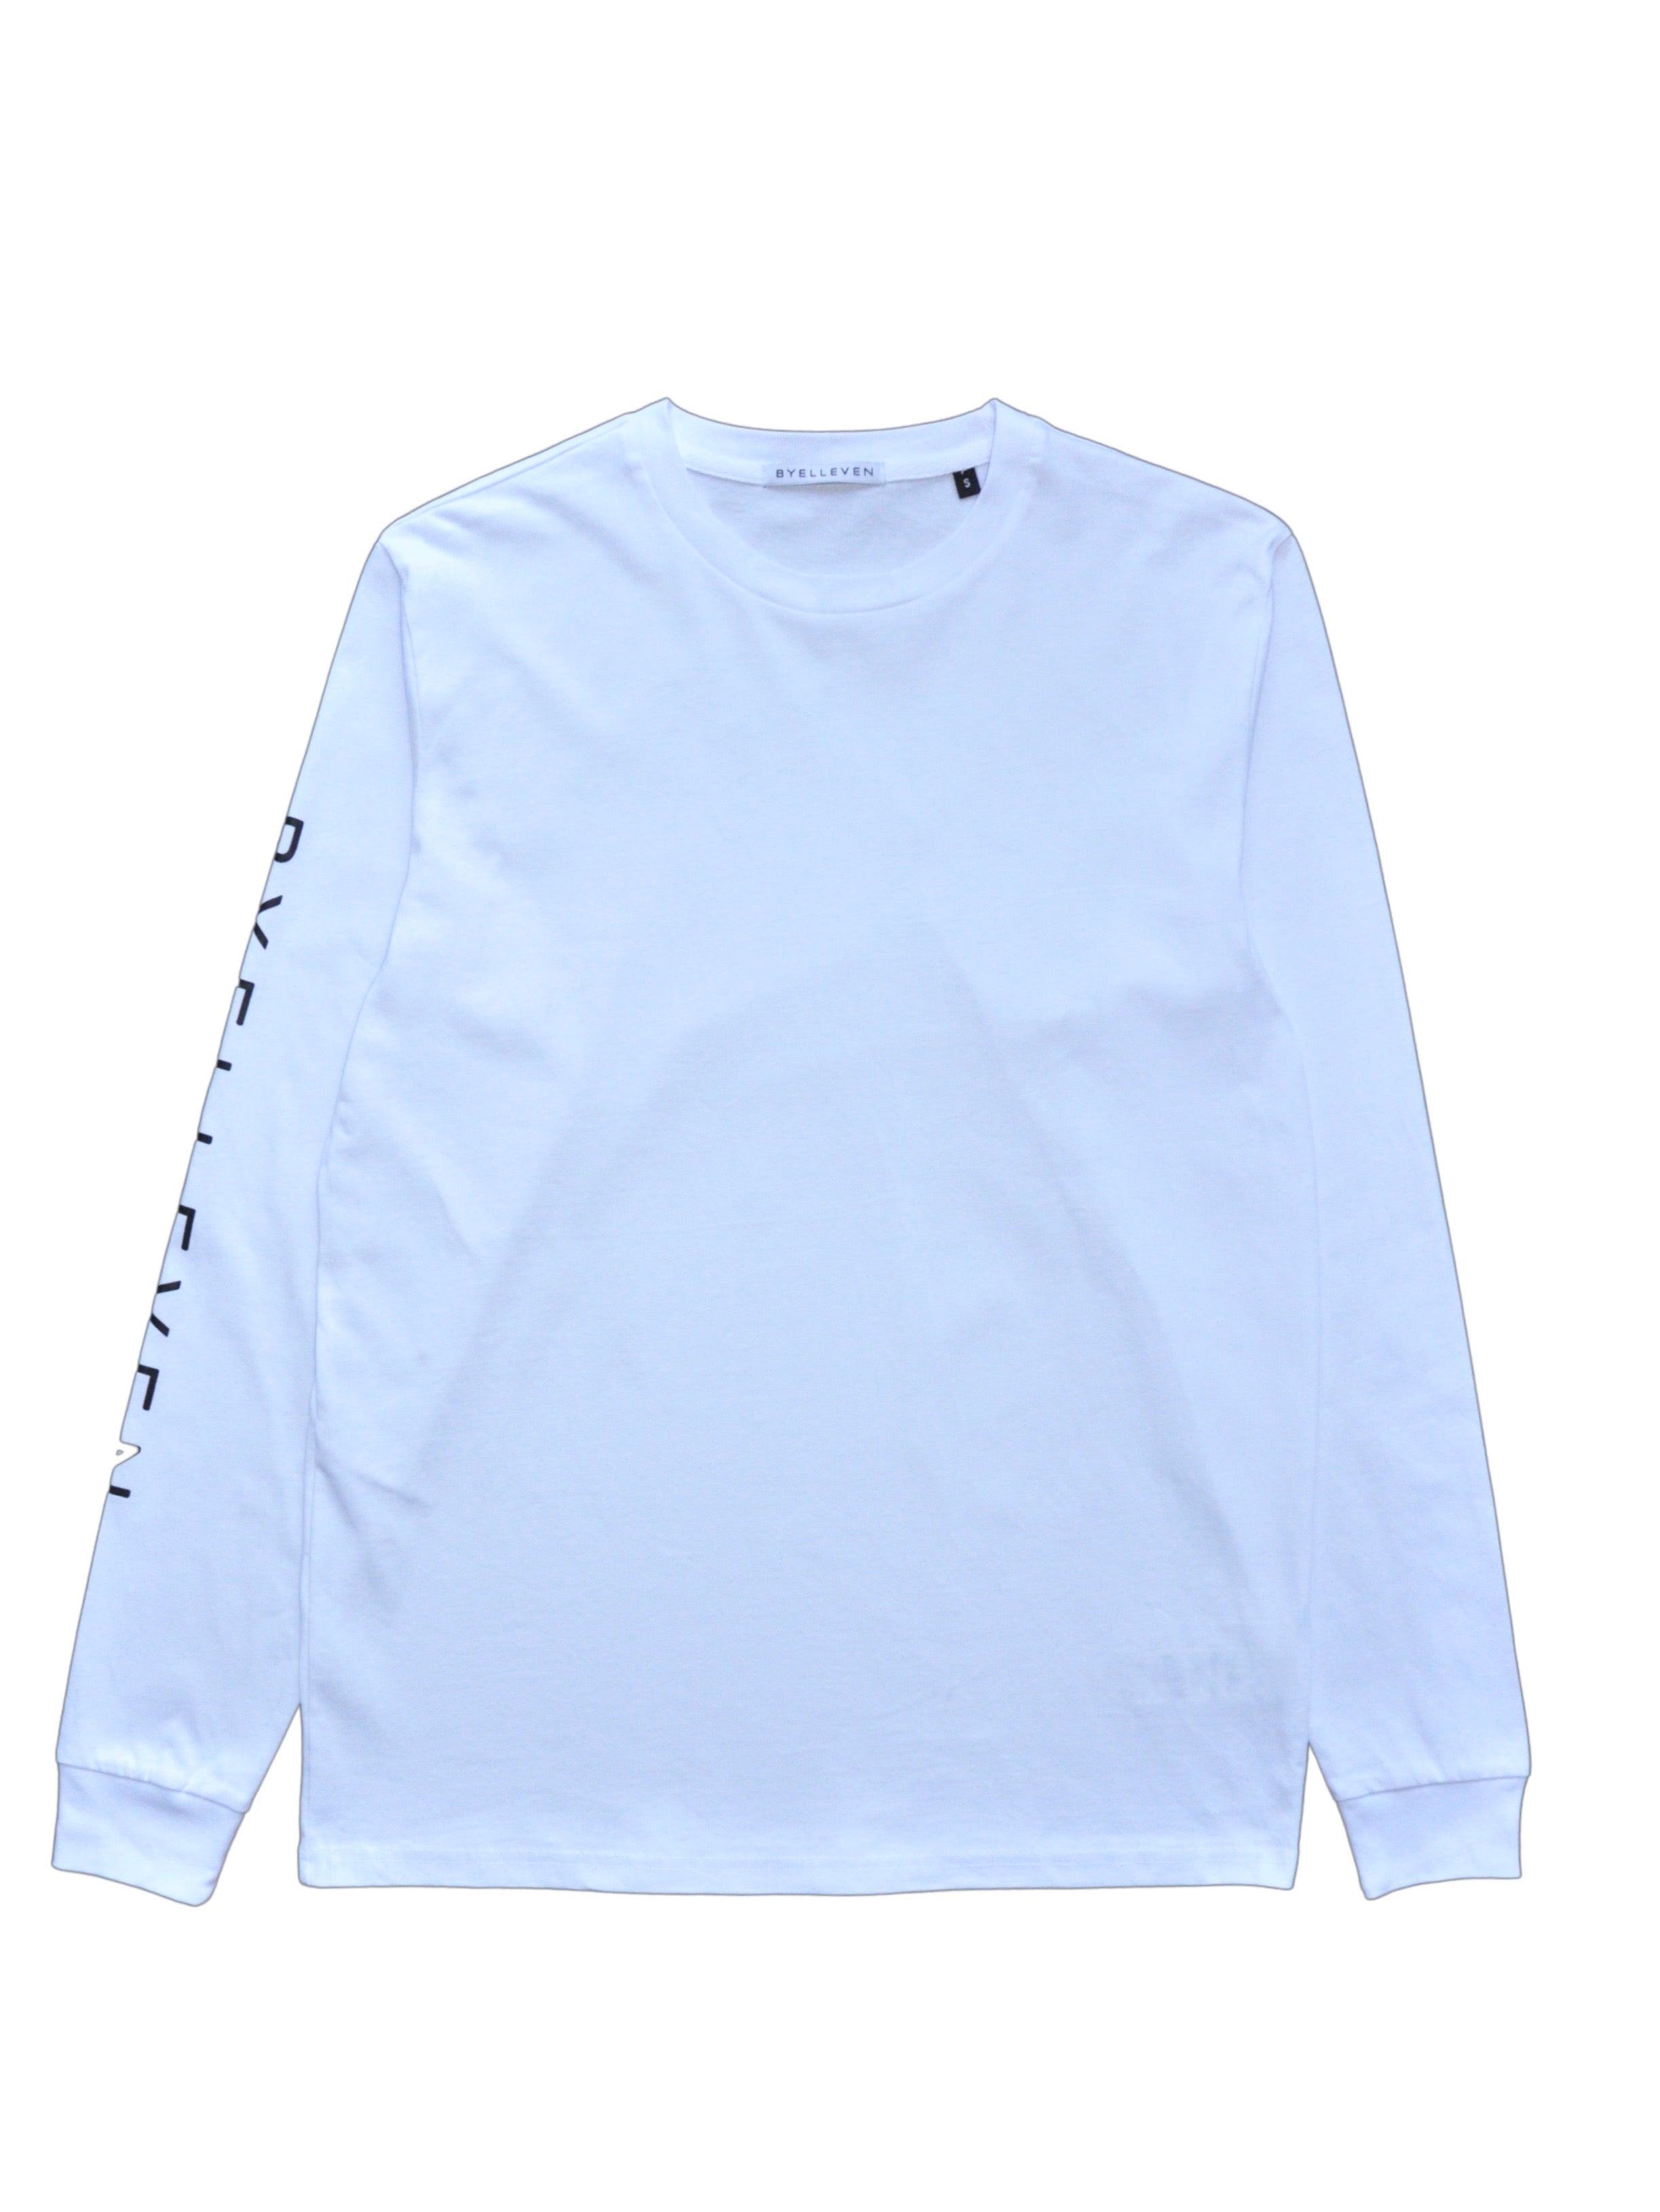 BY11 x Intangible Objects Organic Cotton L/S T-shirt - White